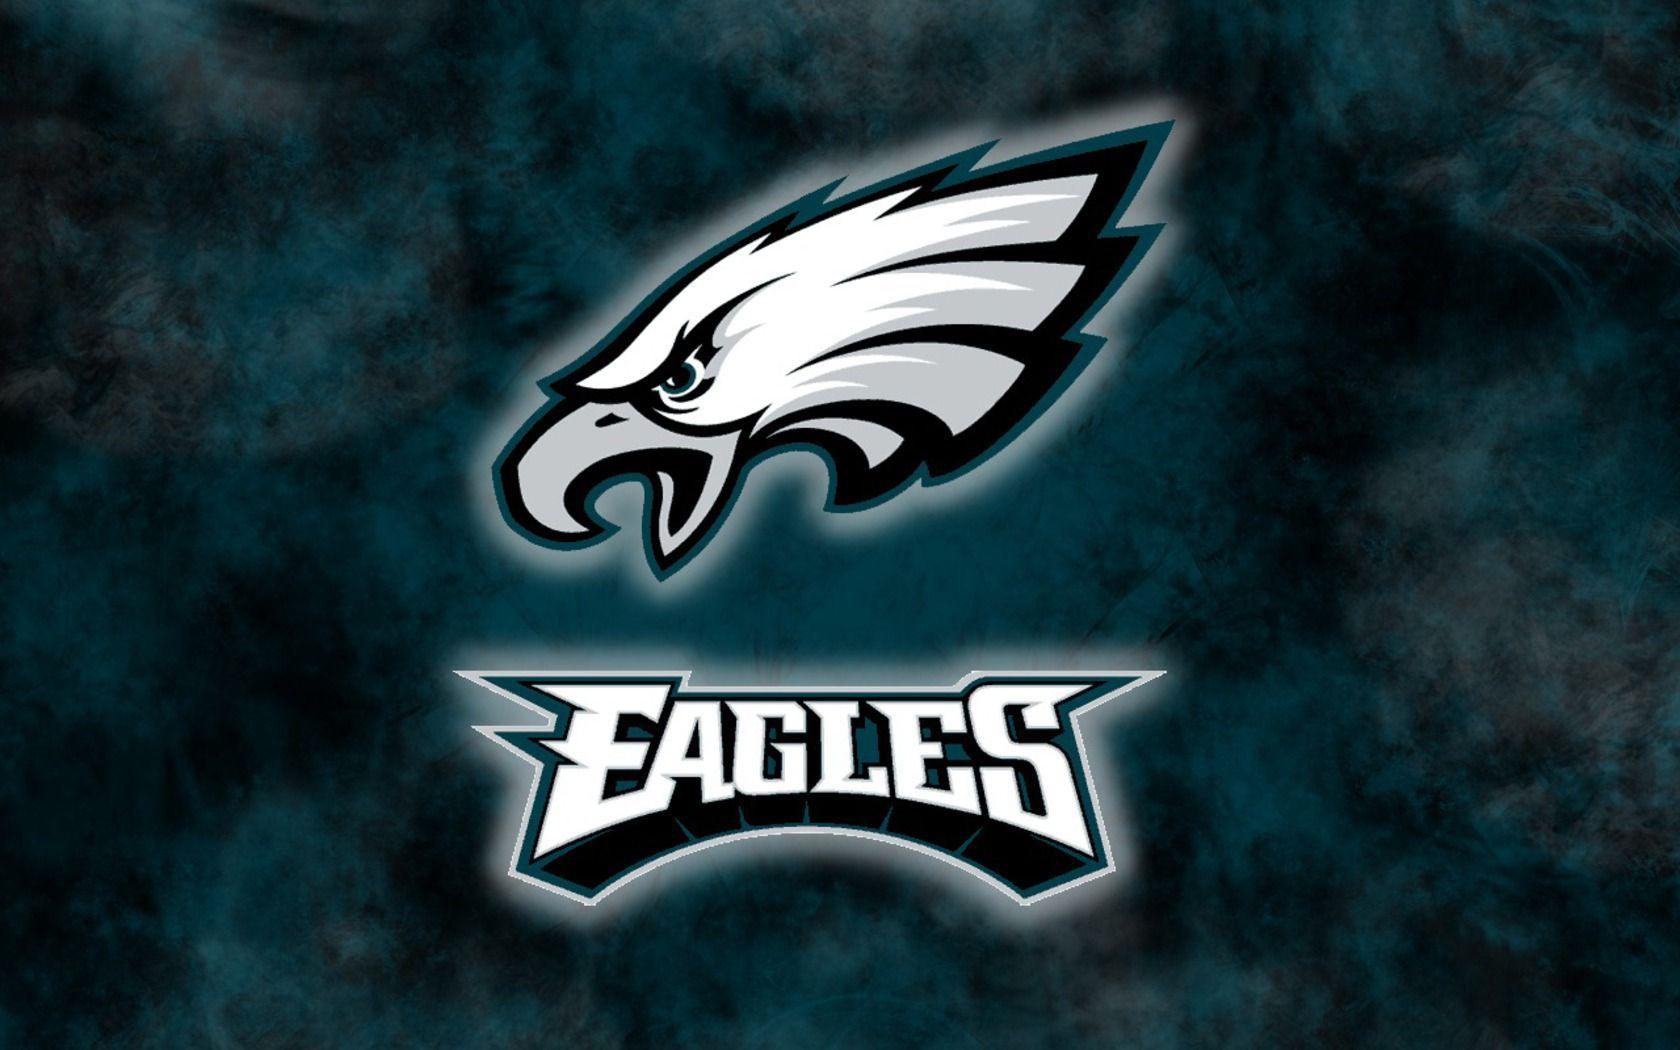 Philadelphia Eagles Wallpaper For Android. Piccry.com: Picture